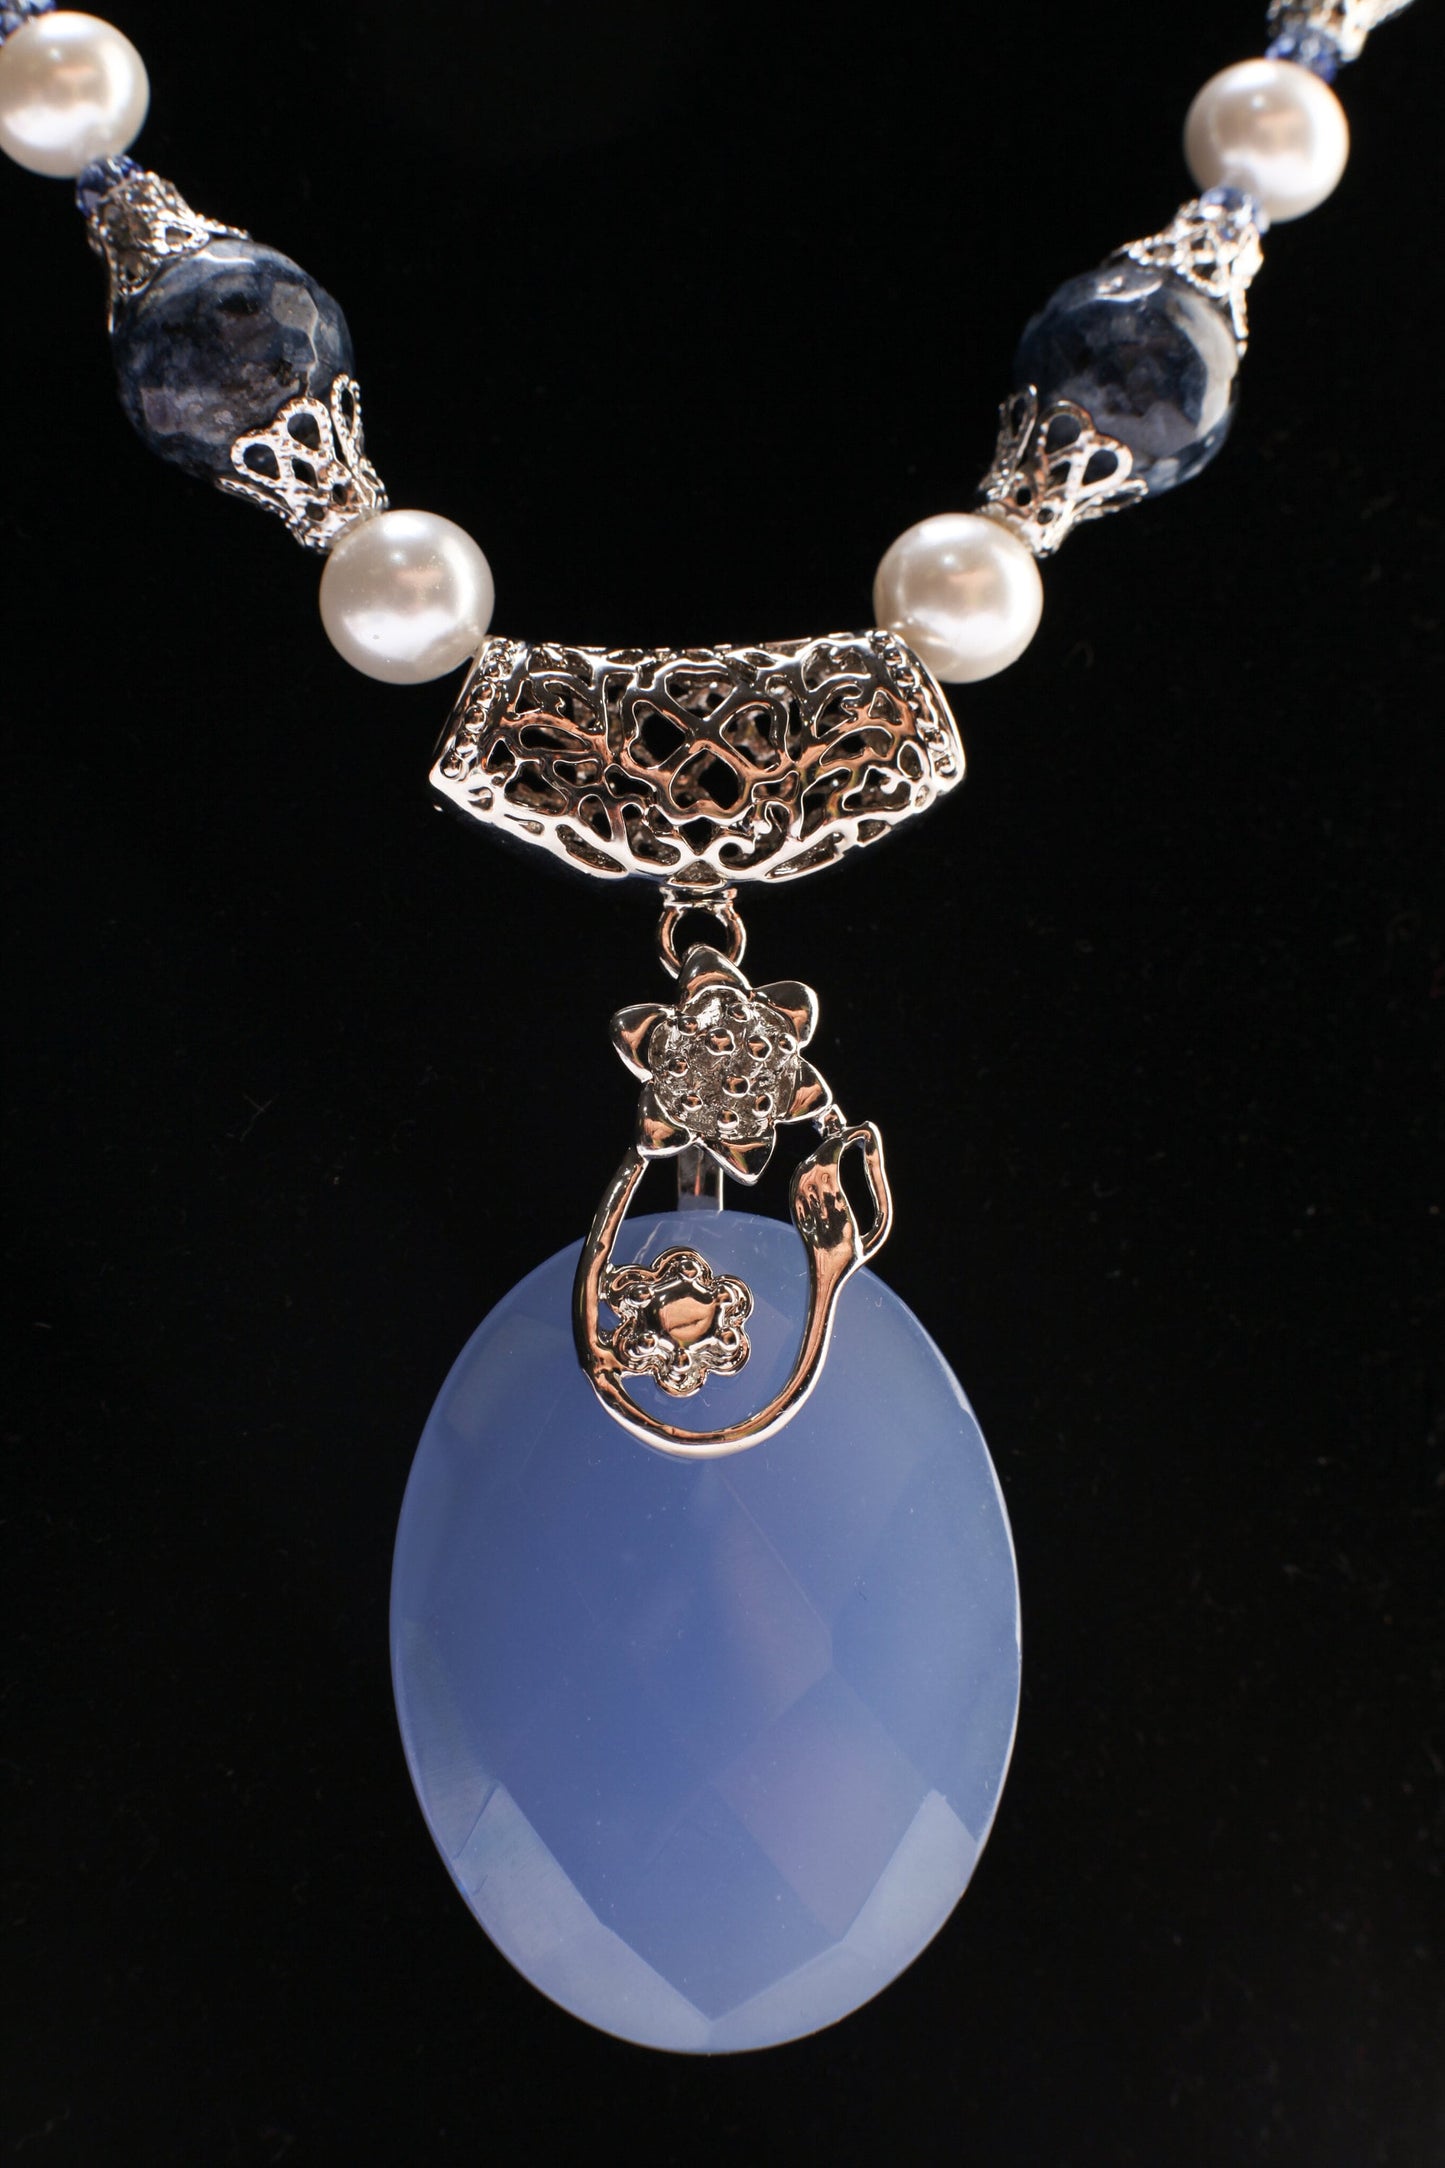 Periwinkle Blue Chalcedony 29x39mm Oval Pendant with Fancy Rhodium Bail, South Sea Shell Pearl Bali Style Necklace 8mm Round 22" Necklace